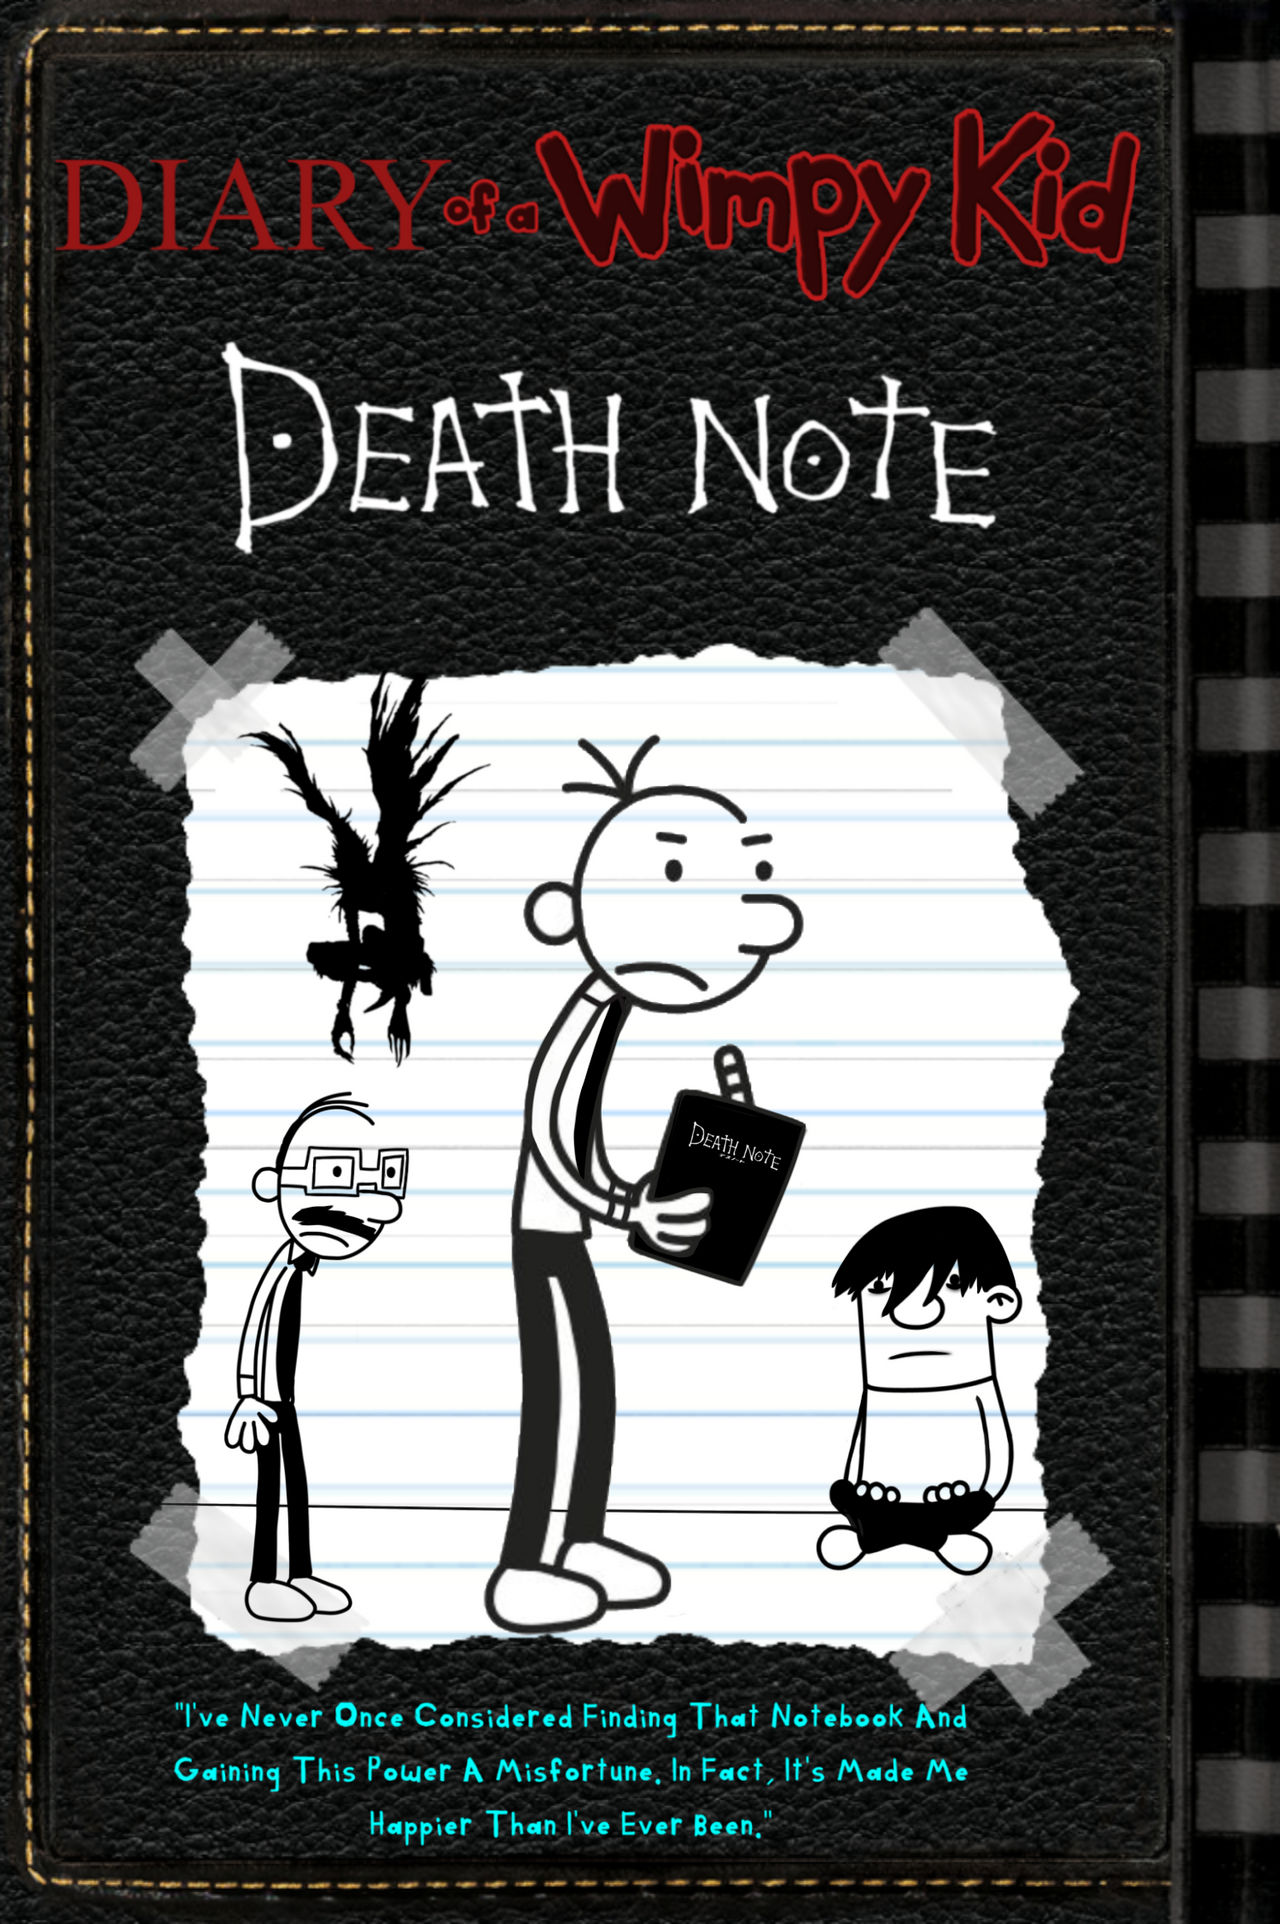 Diary of wimpy kid death note by badredkitt on DeviantArt